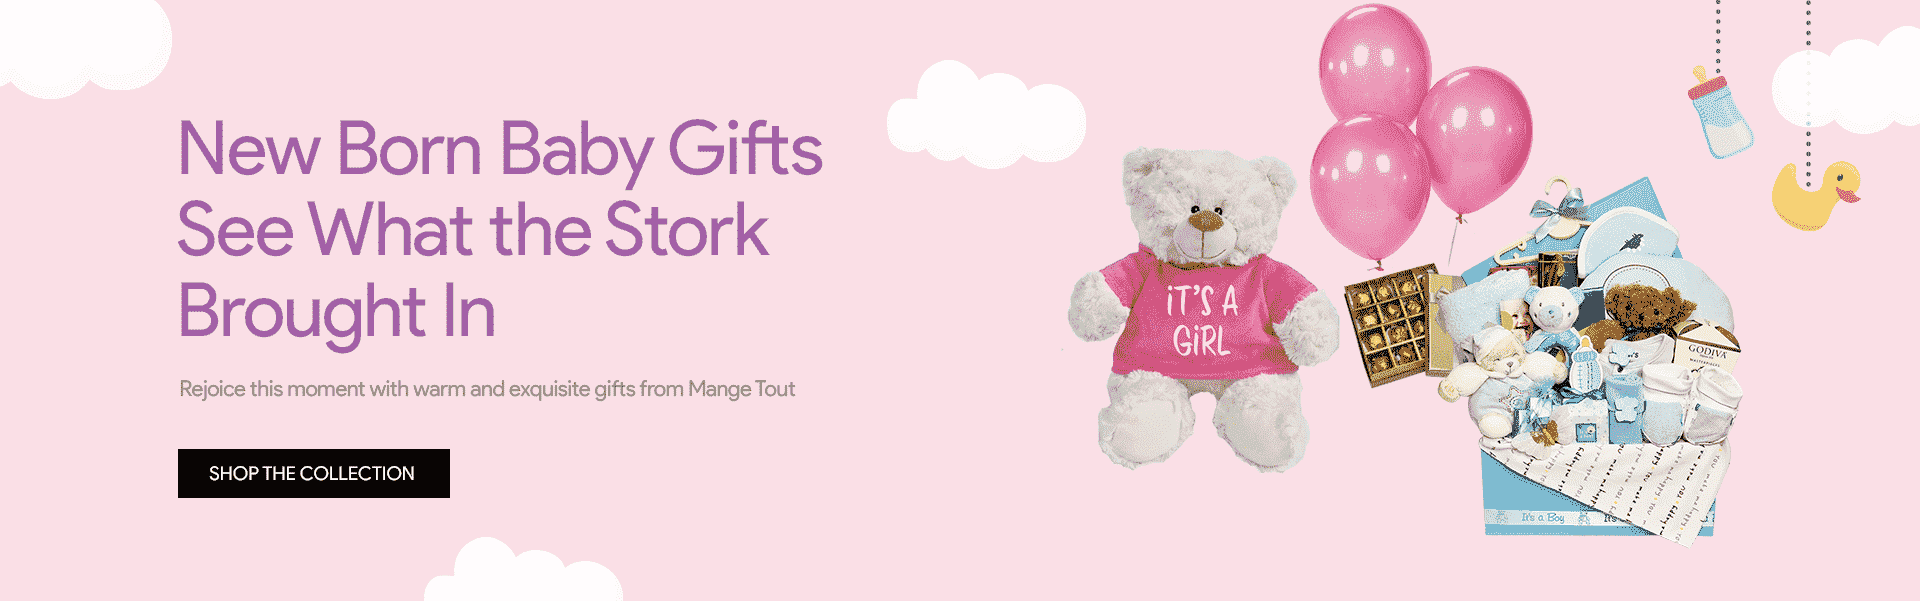 New Born Gifts Deals